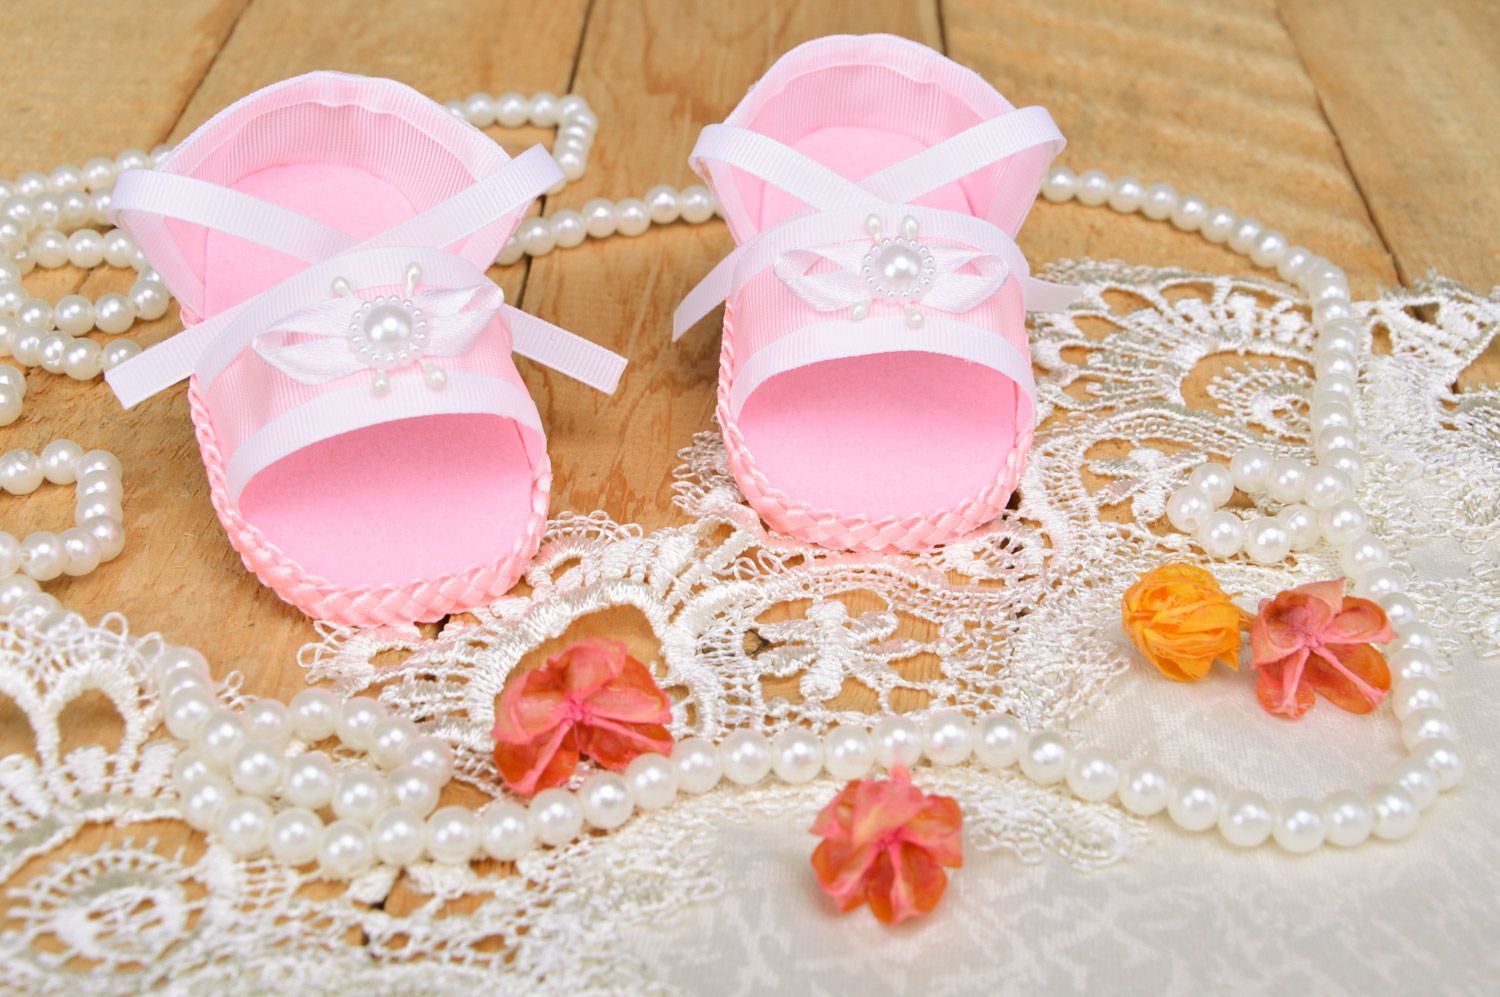 Handmade beautiful pink baby girl sandals sewn of felt and rep ribbons photo 1